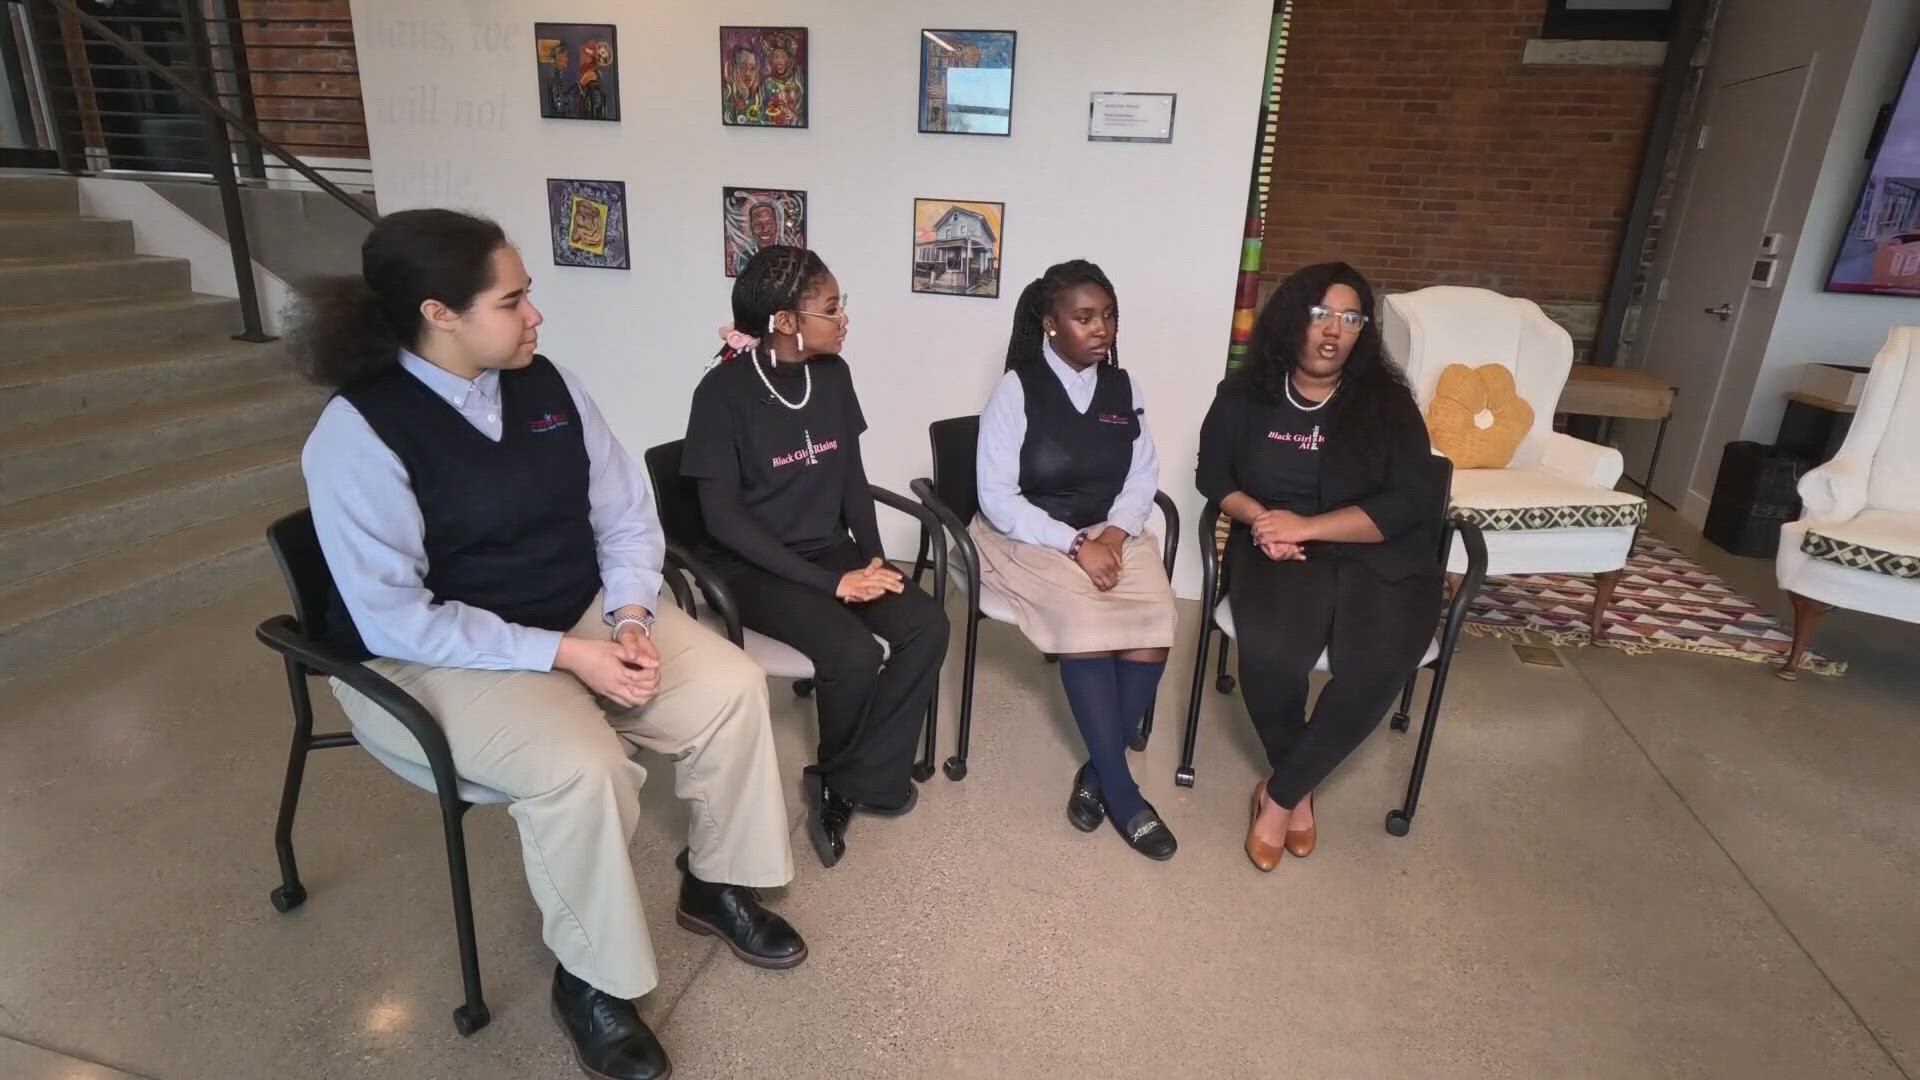 10TV spoke with members of the group "black girl rising" on the group's history and their preparations for the future.